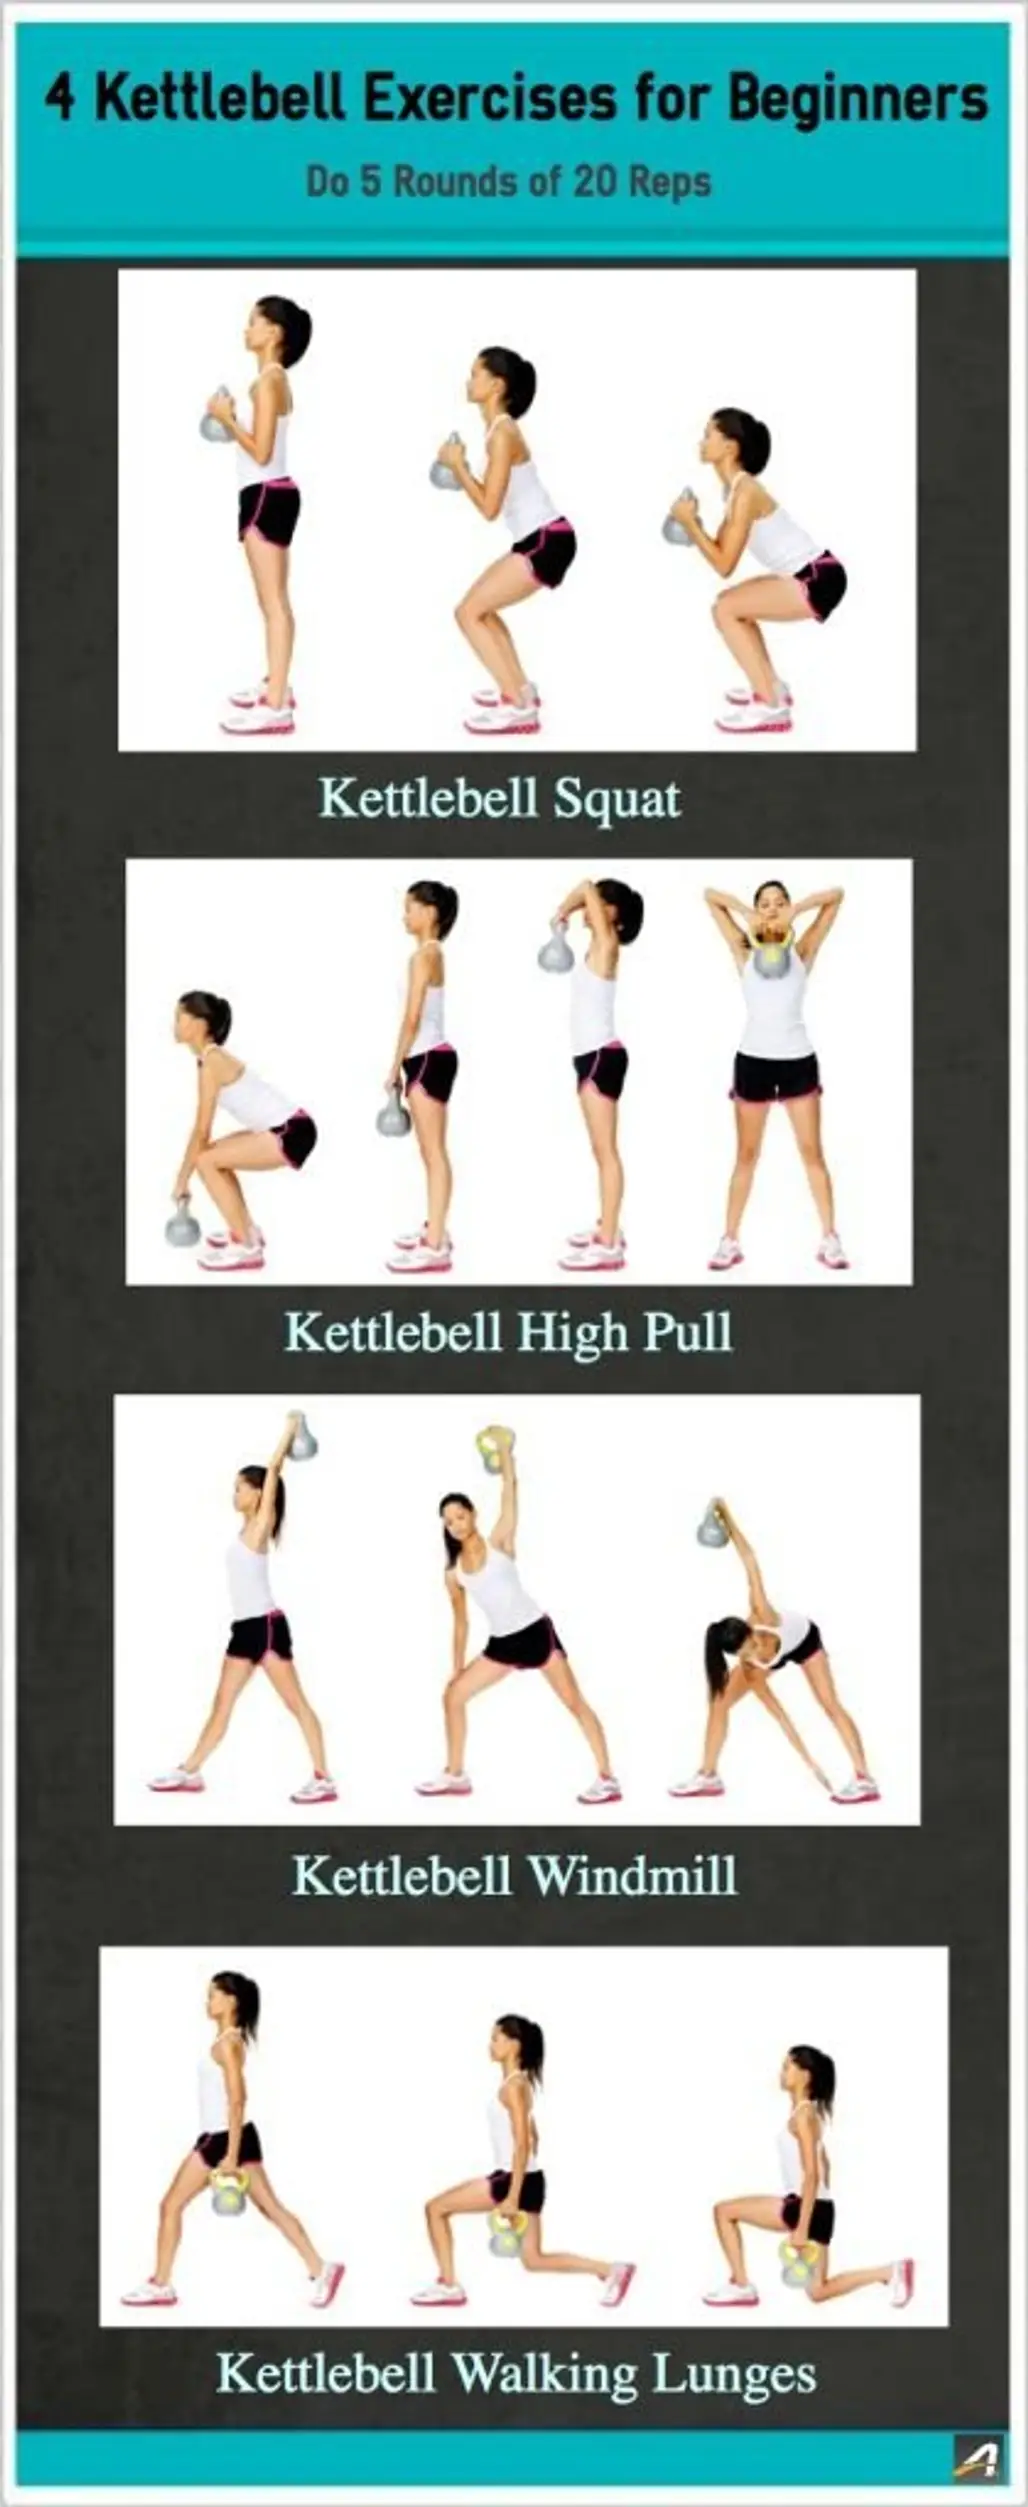 Kettlebell Moves You Need To Try, And A Full Body Kettlebell Workout